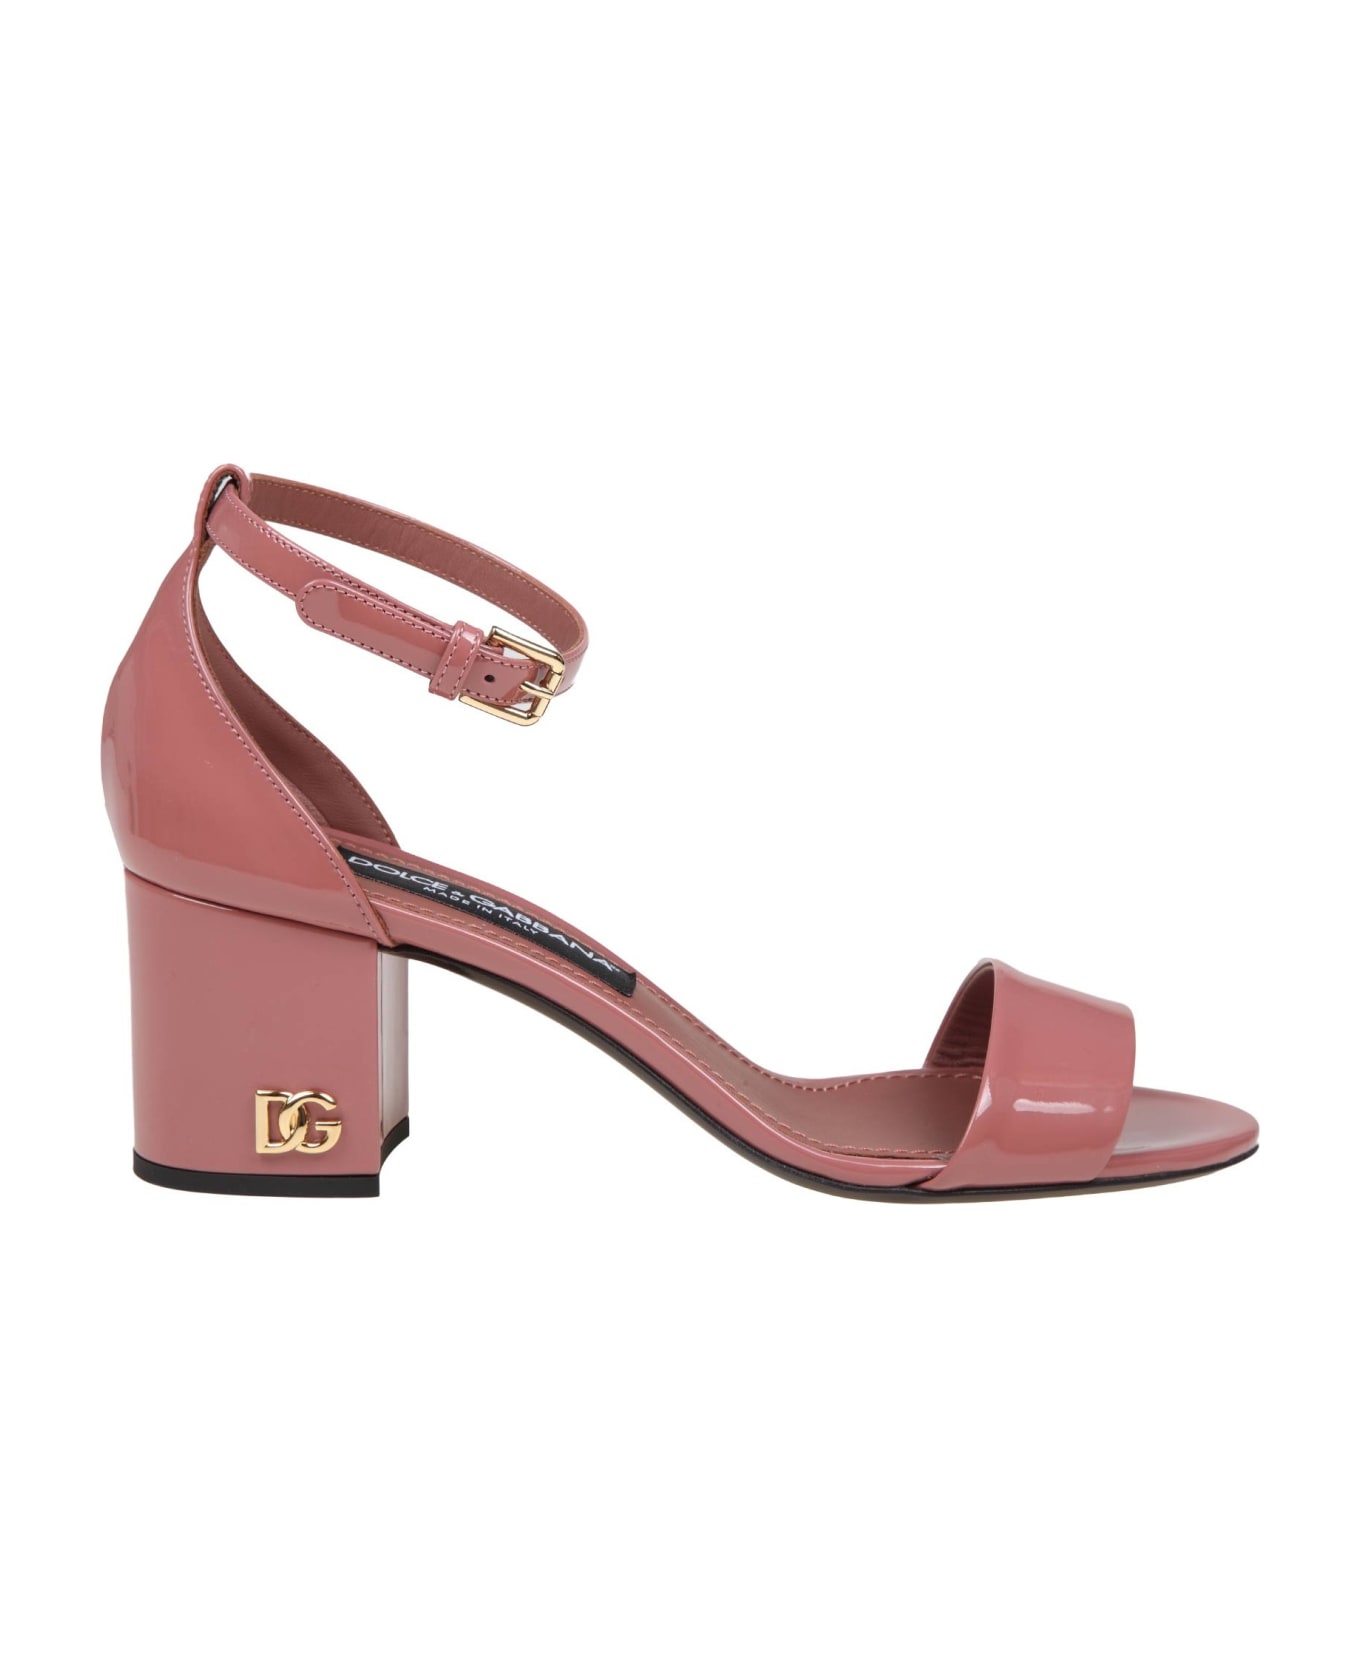 Dolce & Gabbana Pink Paint Leather Sandals - PINK